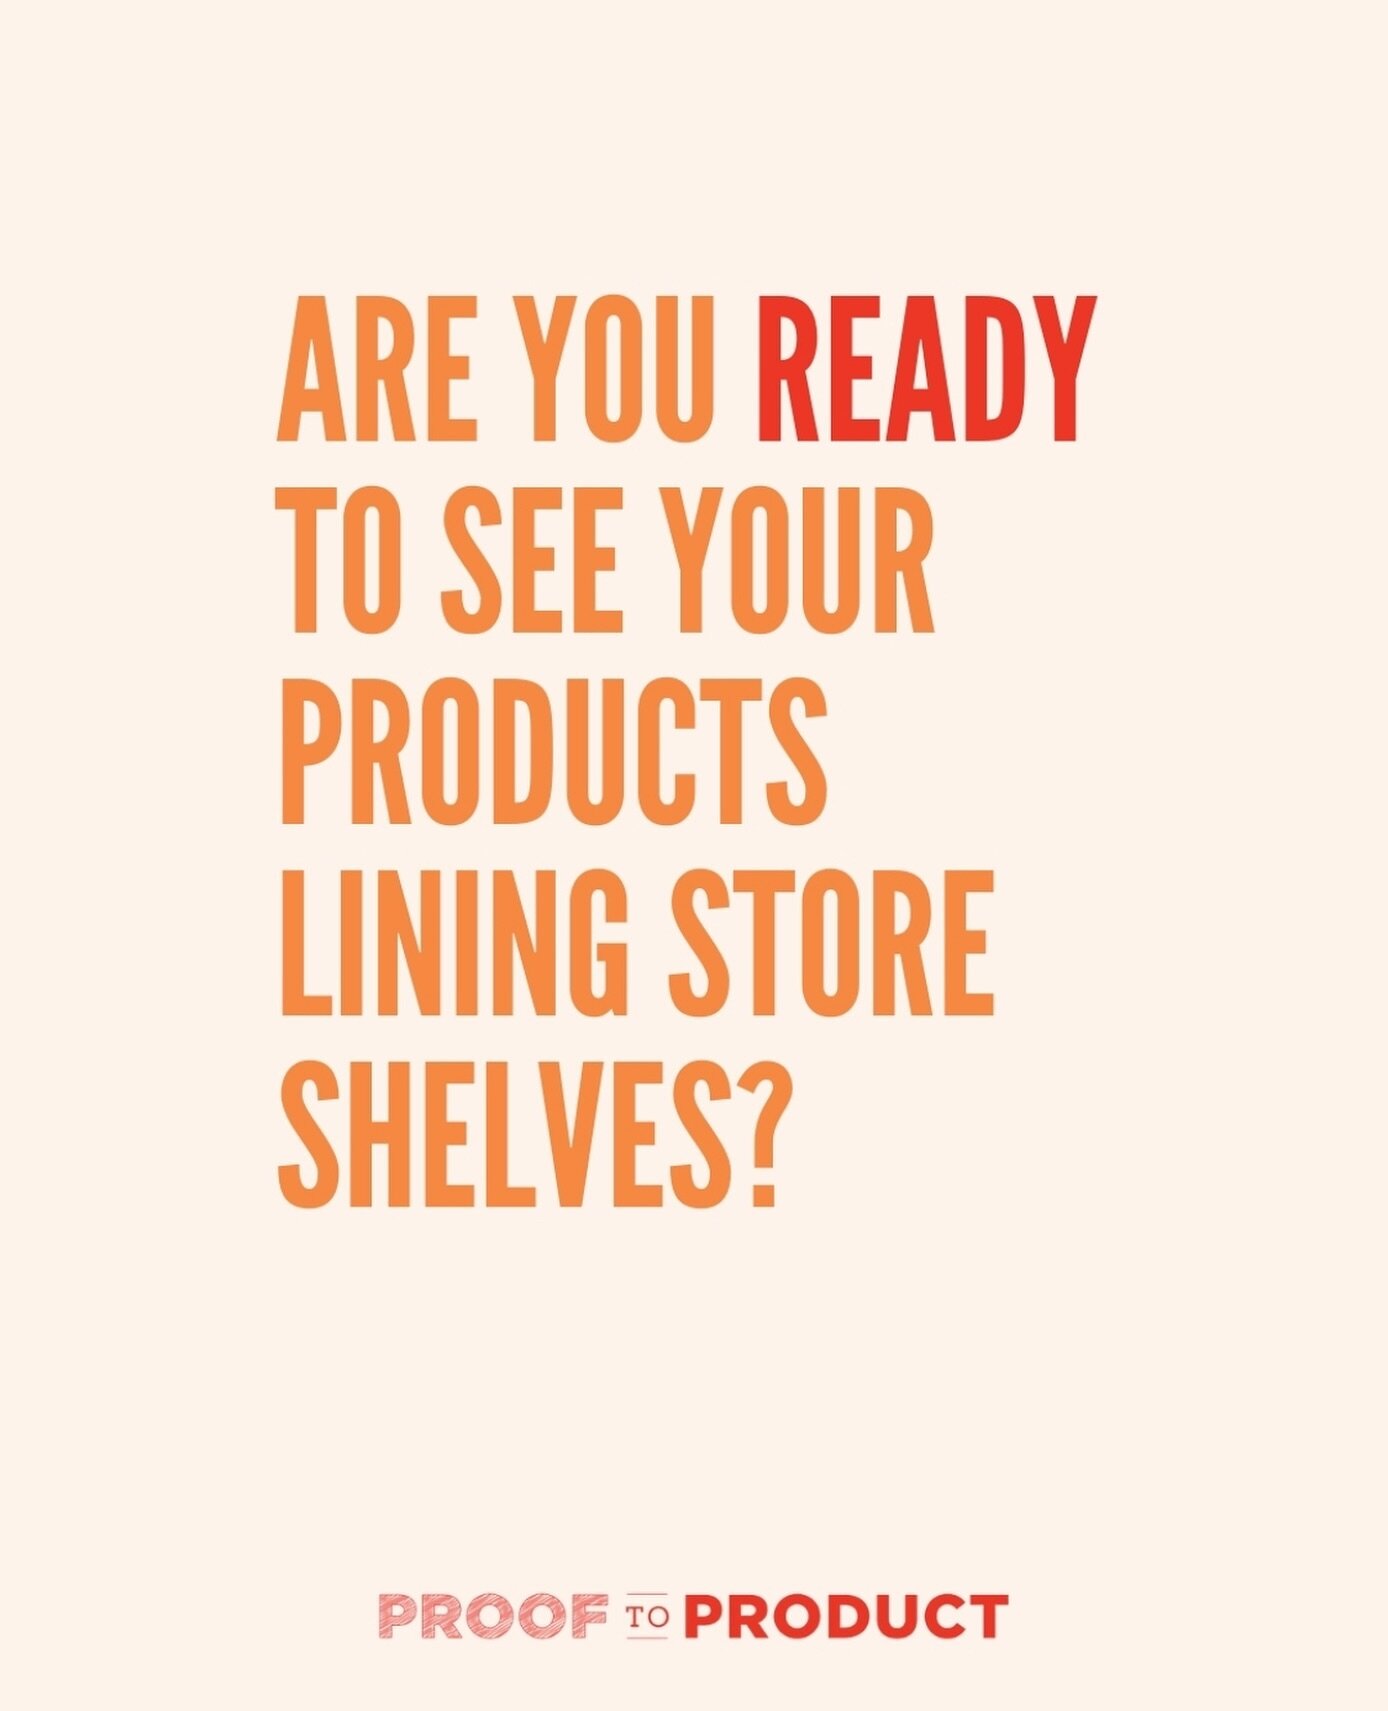 Are you ready to see your products lining the shelves of your favorite stores big and small?⁣

We&rsquo;ve got you. Comment &ldquo;READY&rdquo; and I&rsquo;ll send you our free wholesale audio series to help you get started. 👇🏼 

No fluff, just act